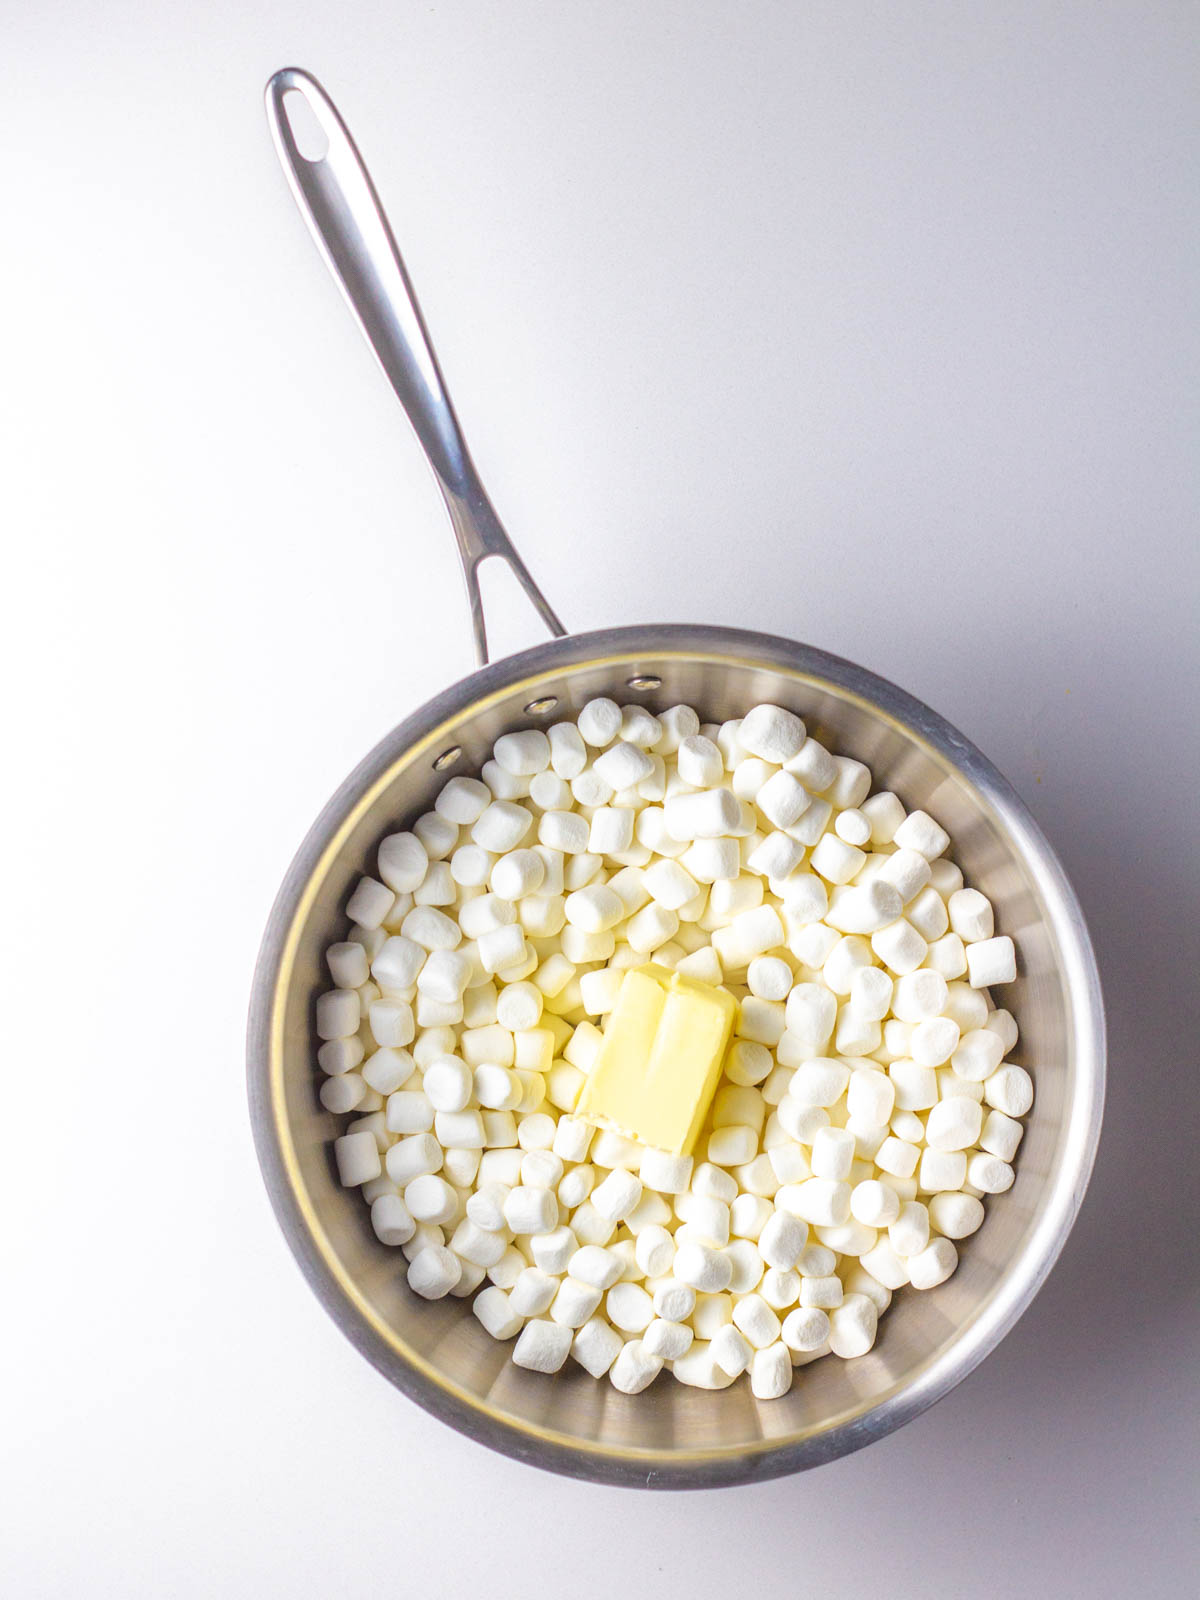 Mini marshmallows and butter in a saucepan.